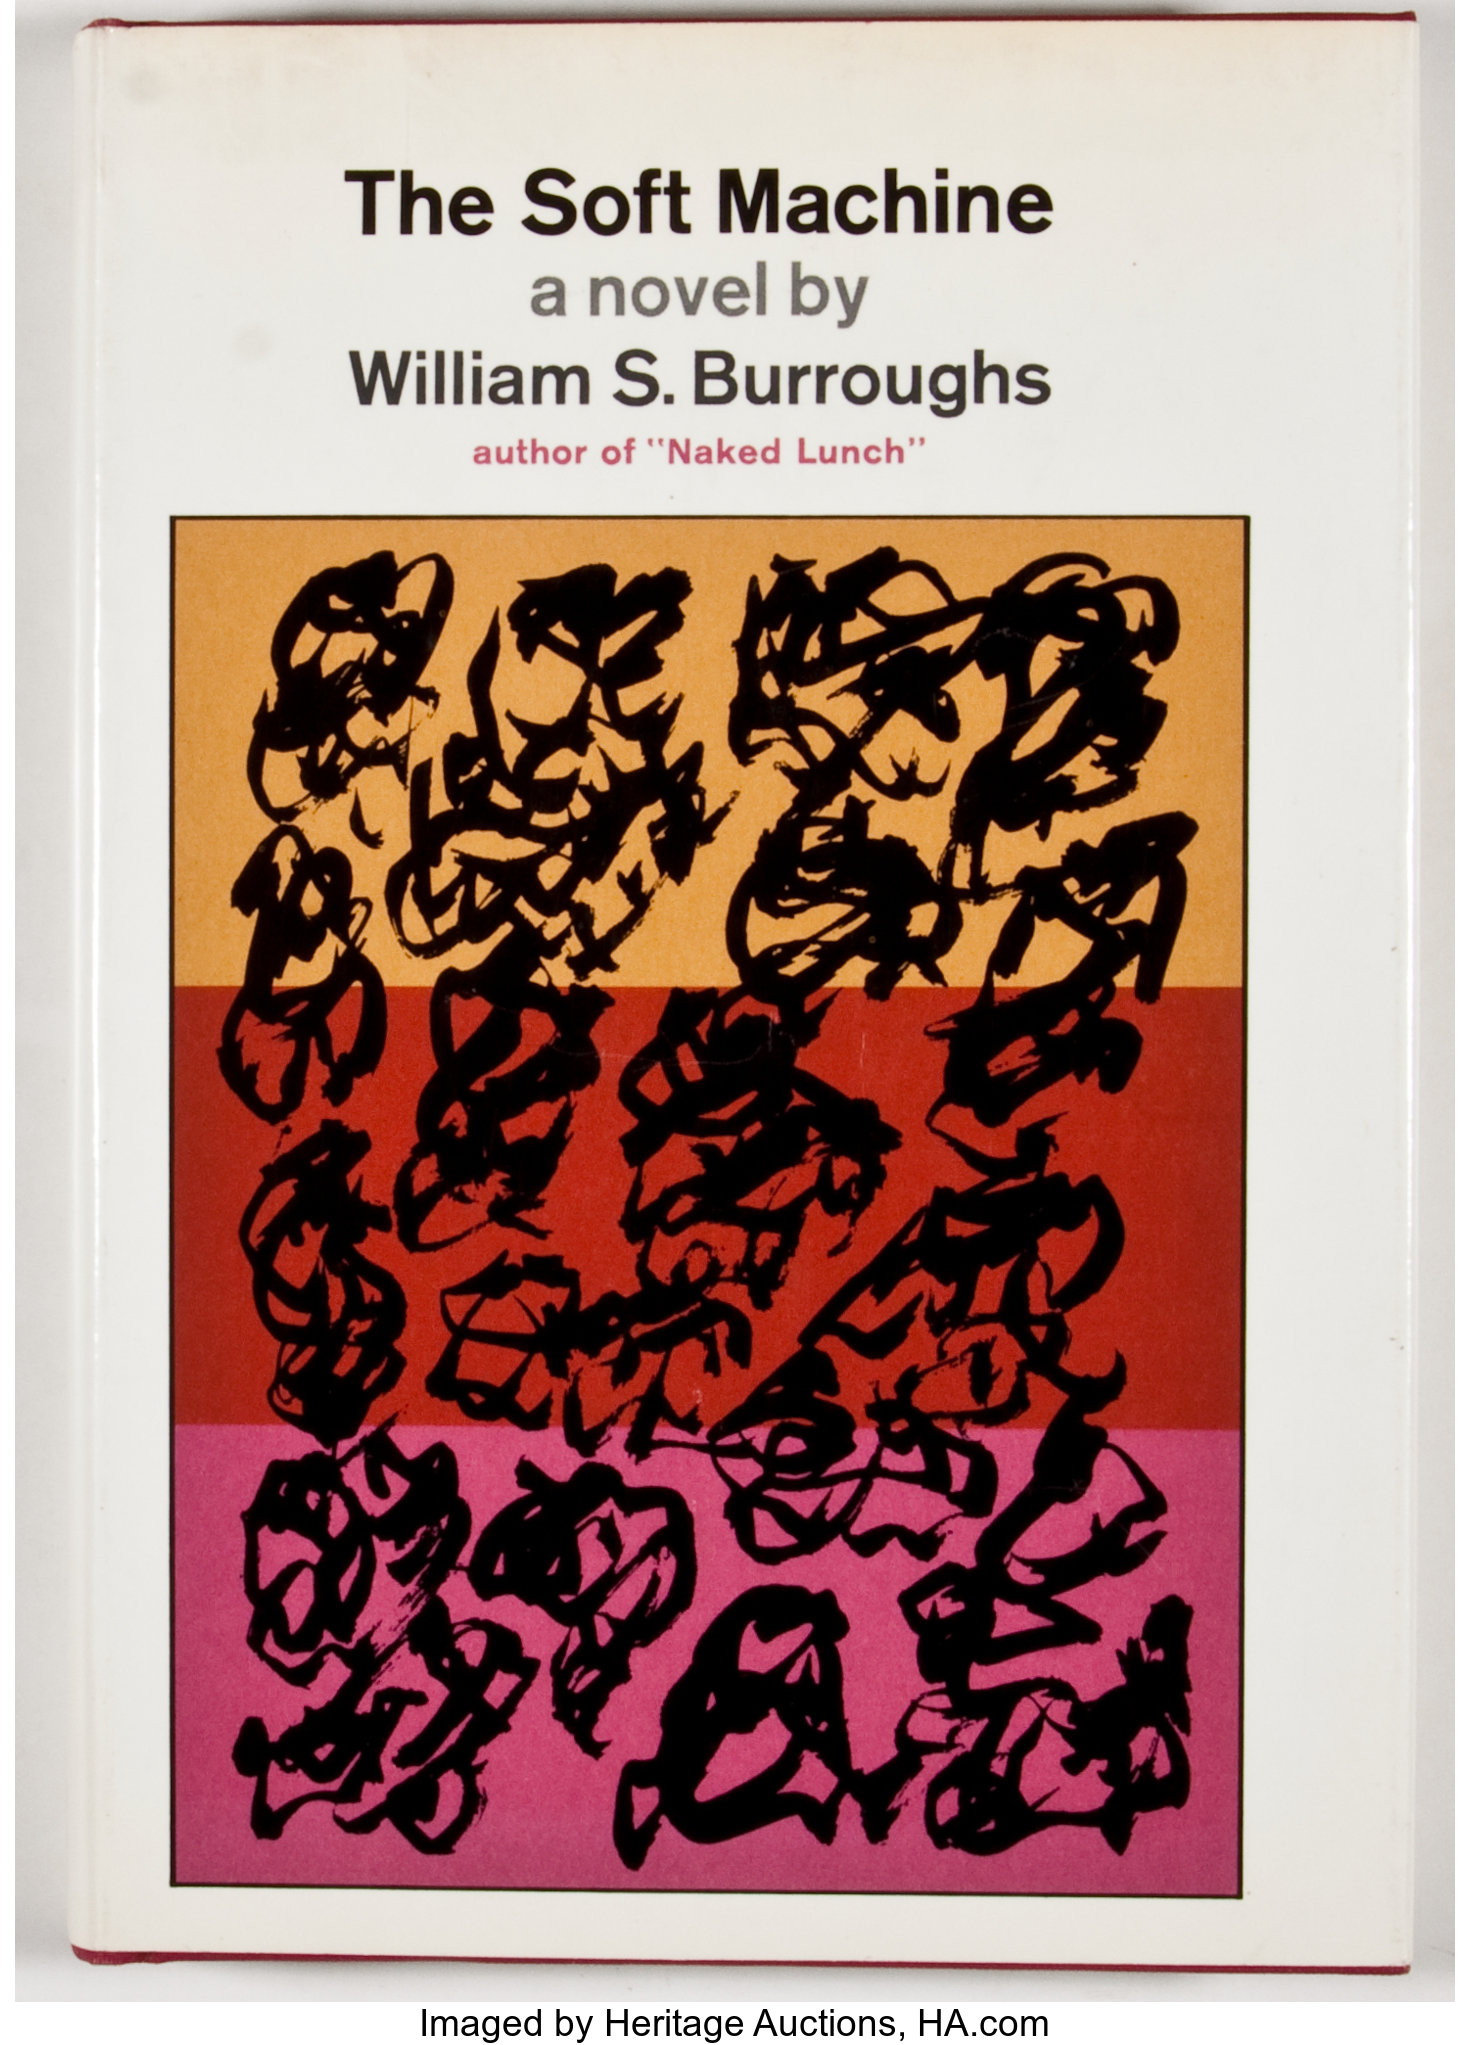 The Soft Machine: Unveiling William S. Burroughs’ Literary Realm